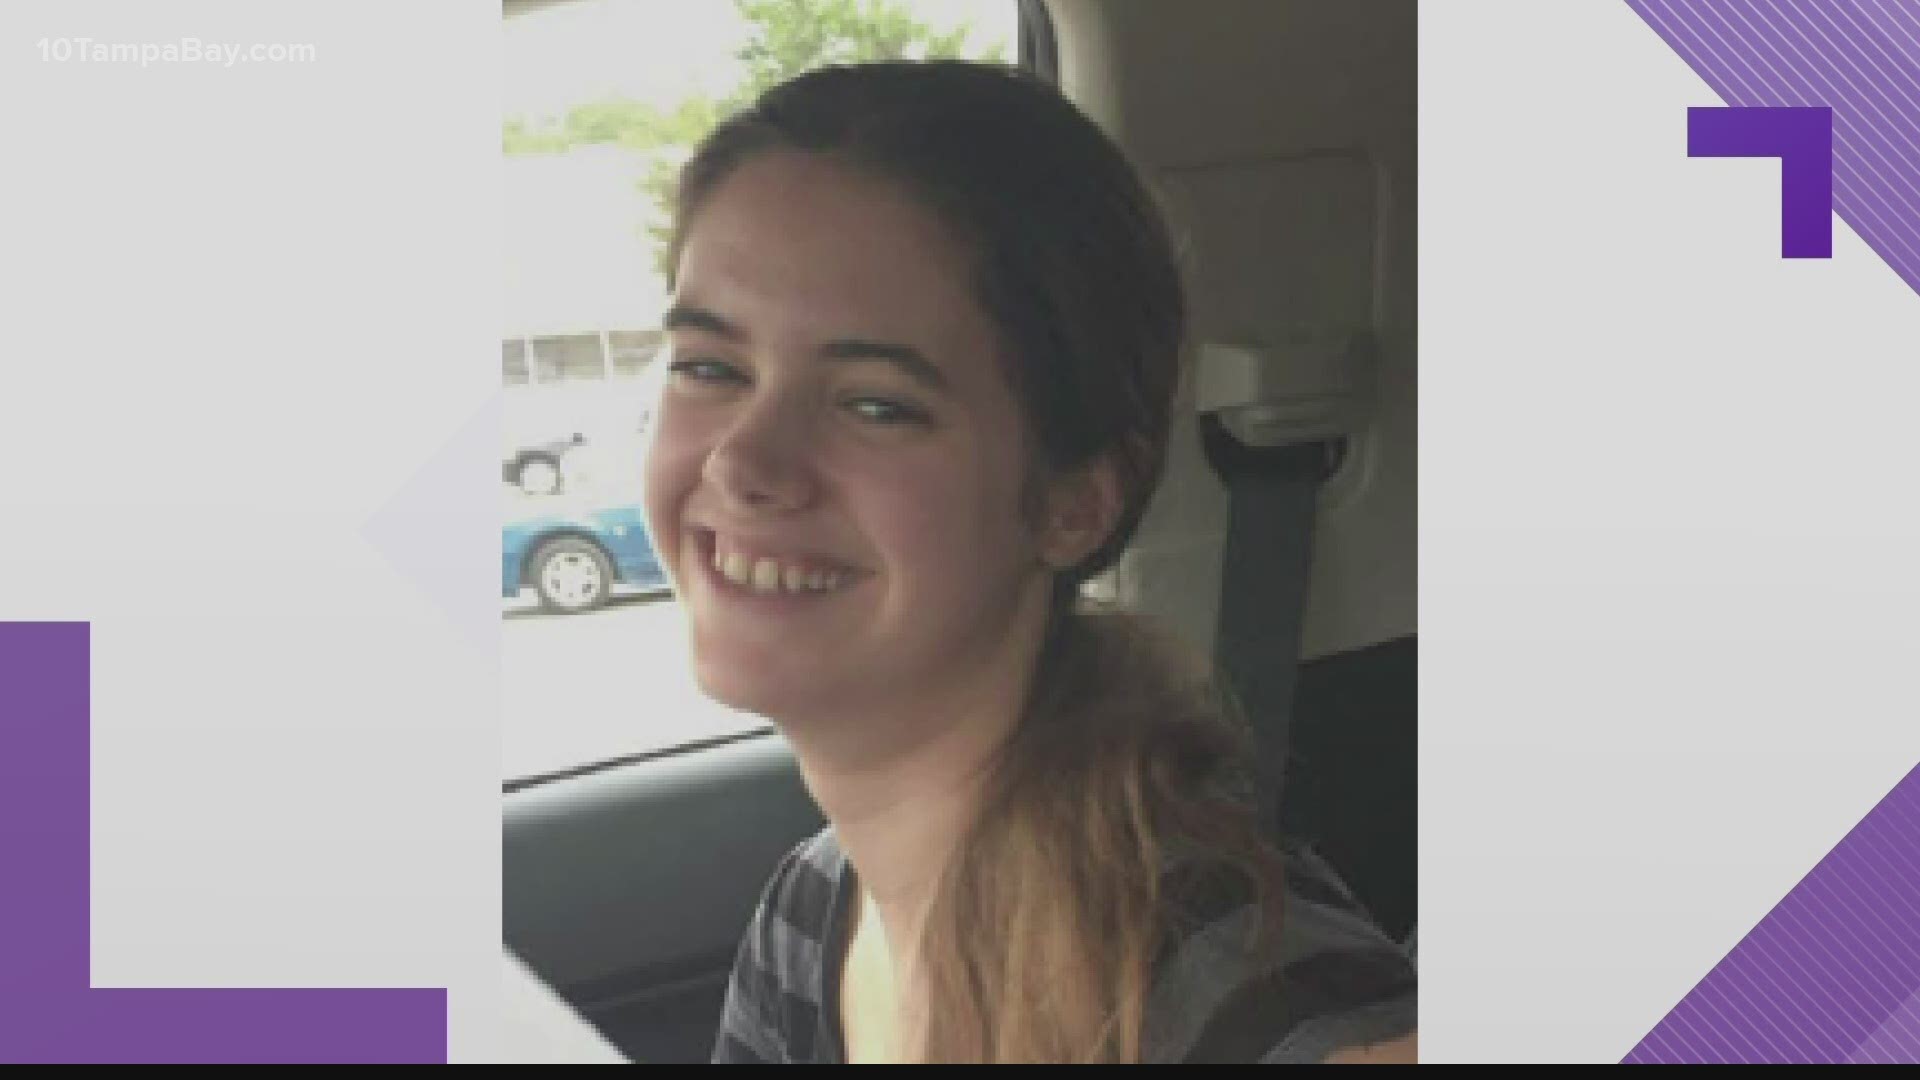 The Tennessee Bureau of Investigation said on May 28 she was found safe in Samson, Alabama.